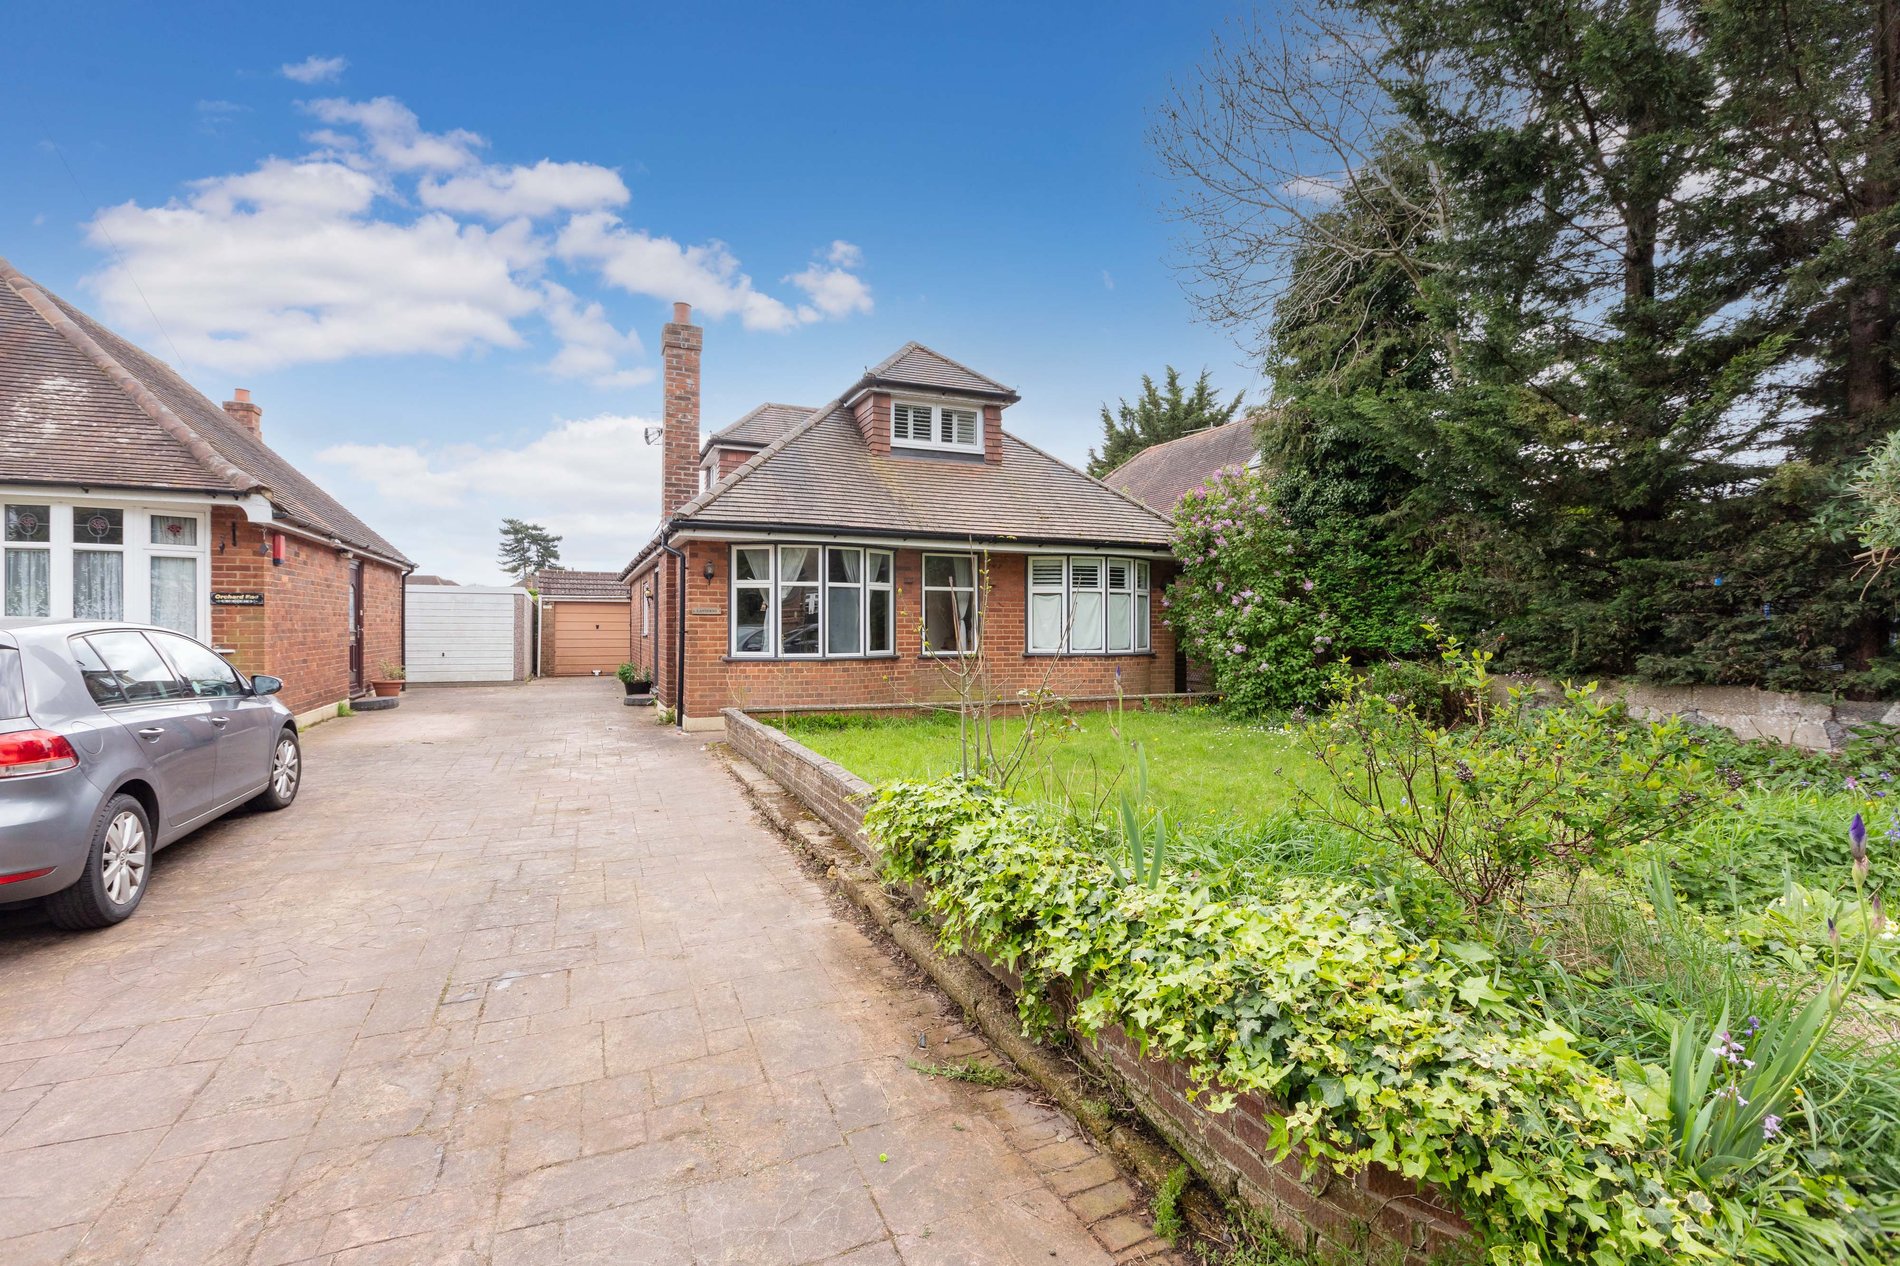 3 bed detached bungalow for sale in Holly Bush Lane, Iver - Property Image 1